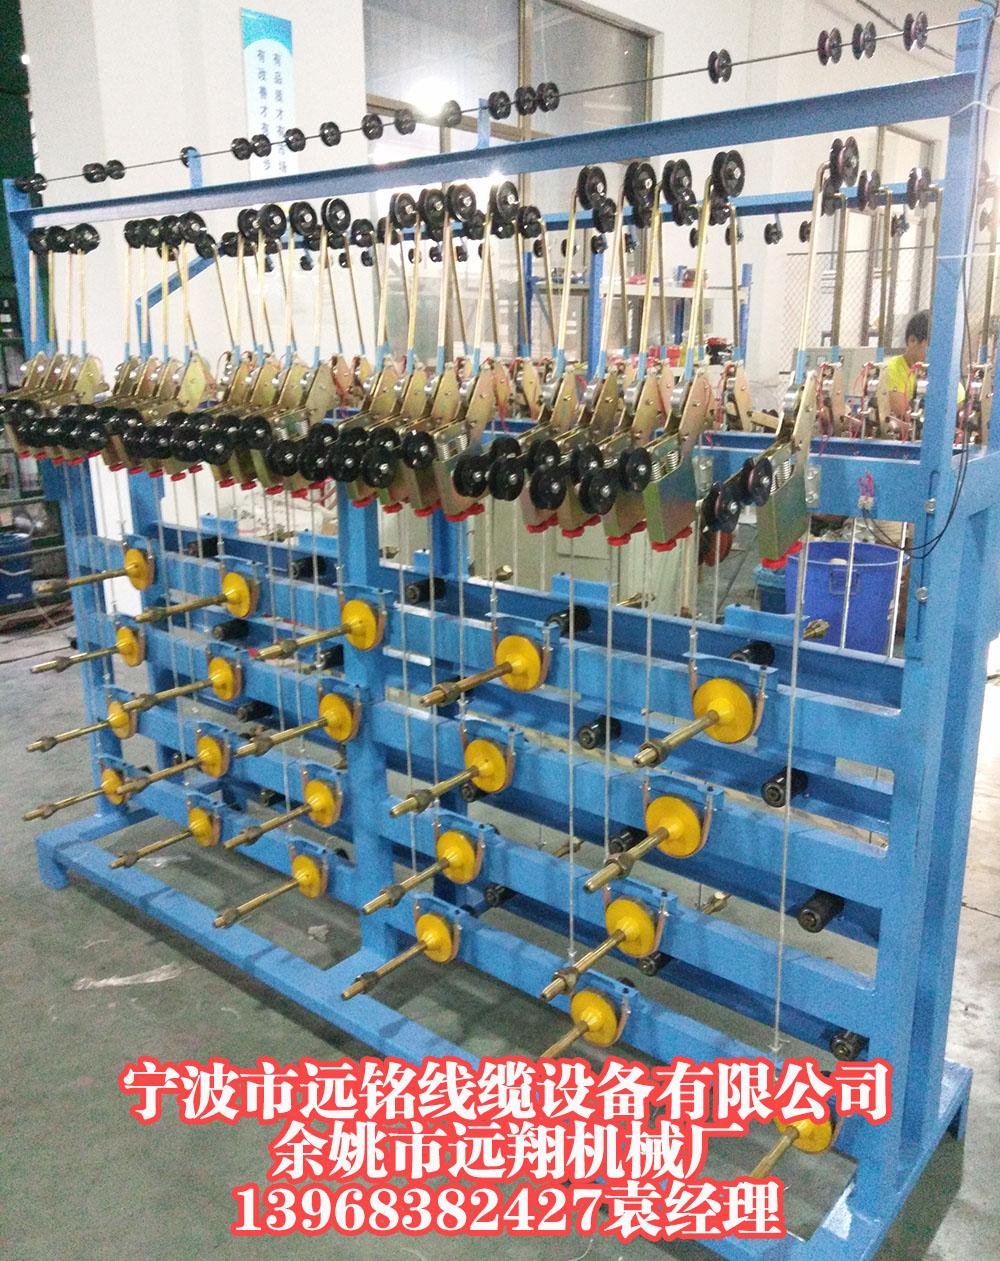 Wire and cable release frame moving disk firing frame active laying frame 3